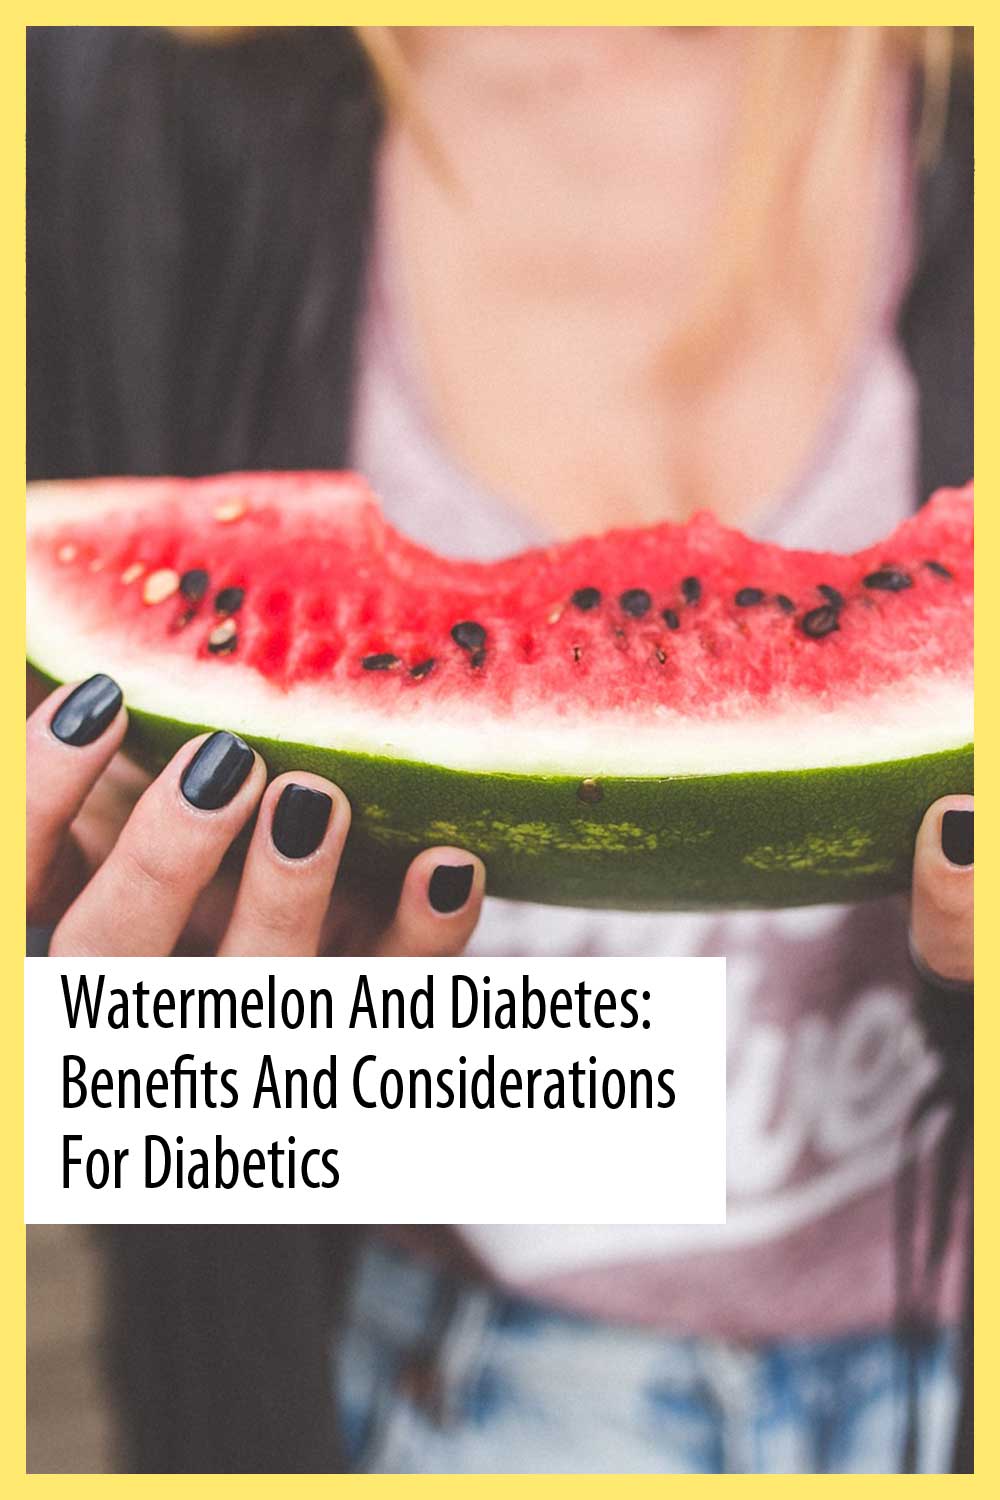 Watermelon and Diabetes: Benefits and Considerations for Diabetics